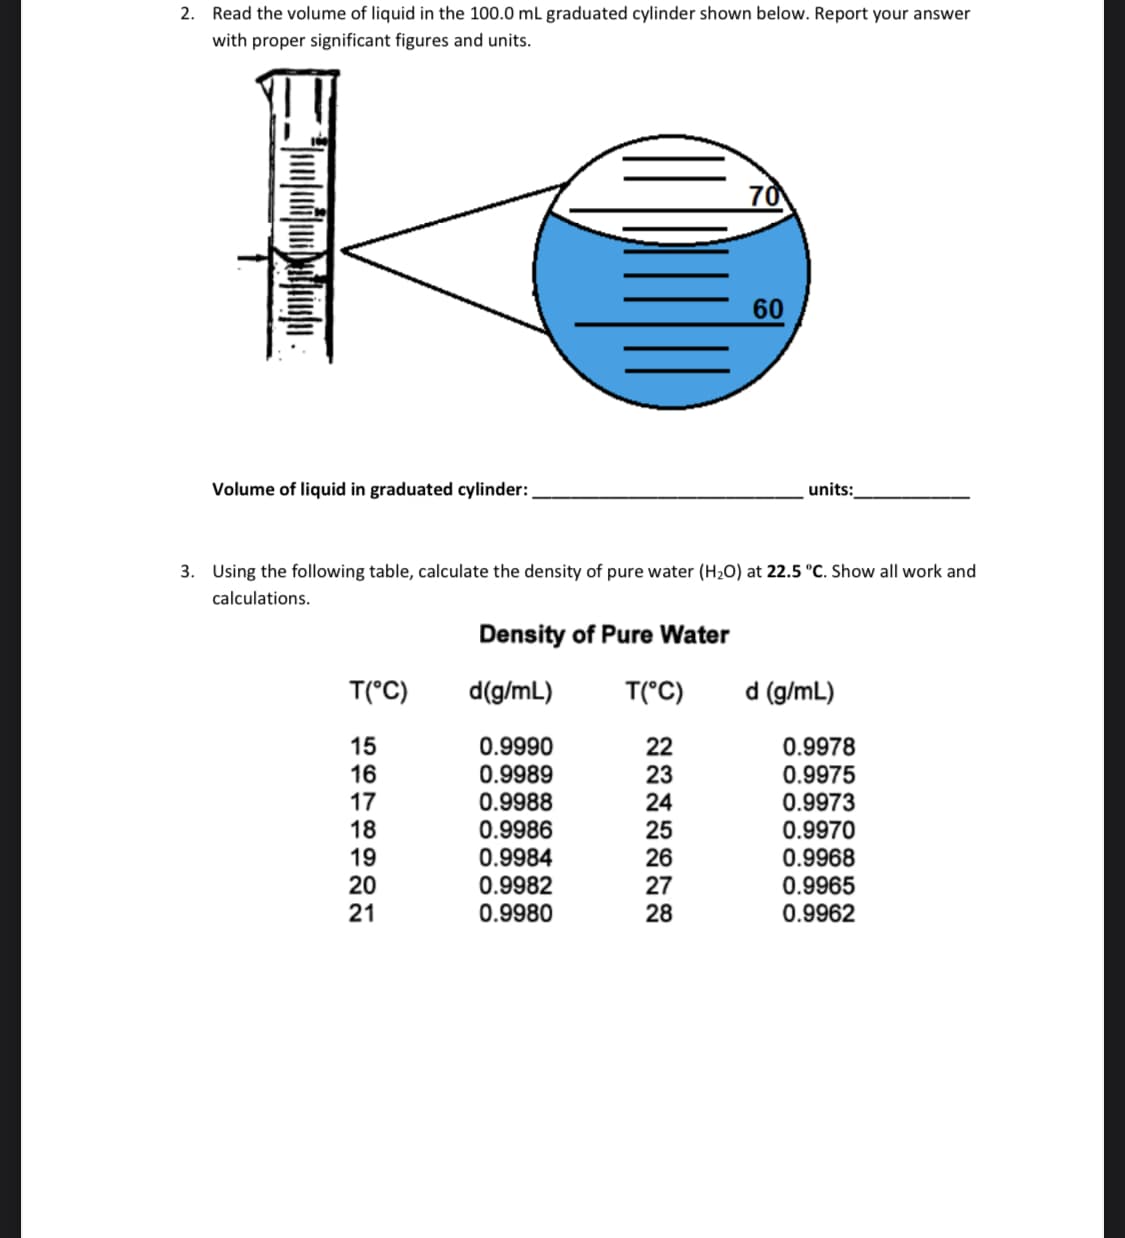 2. Read the volume of liquid in the 100.0 mL graduated cylinder shown below. Report your answer
with proper significant figures and units.
70
60
Volume of liquid in graduated cylinder:
units:
3. Using the following table, calculate the density of pure water (H2O) at 22.5 °C. Show all work and
calculations.
Density of Pure Water
T(°C)
d(g/mL)
T(°C)
d (g/mL)
15
16
17
18
19
20
21
0.9990
0.9989
0.9988
0.9986
0.9984
0.9982
0.9980
0.9978
0.9975
0.9973
0.9970
0.9968
0.9965
0.9962
22
23
24
25
26
27
28
